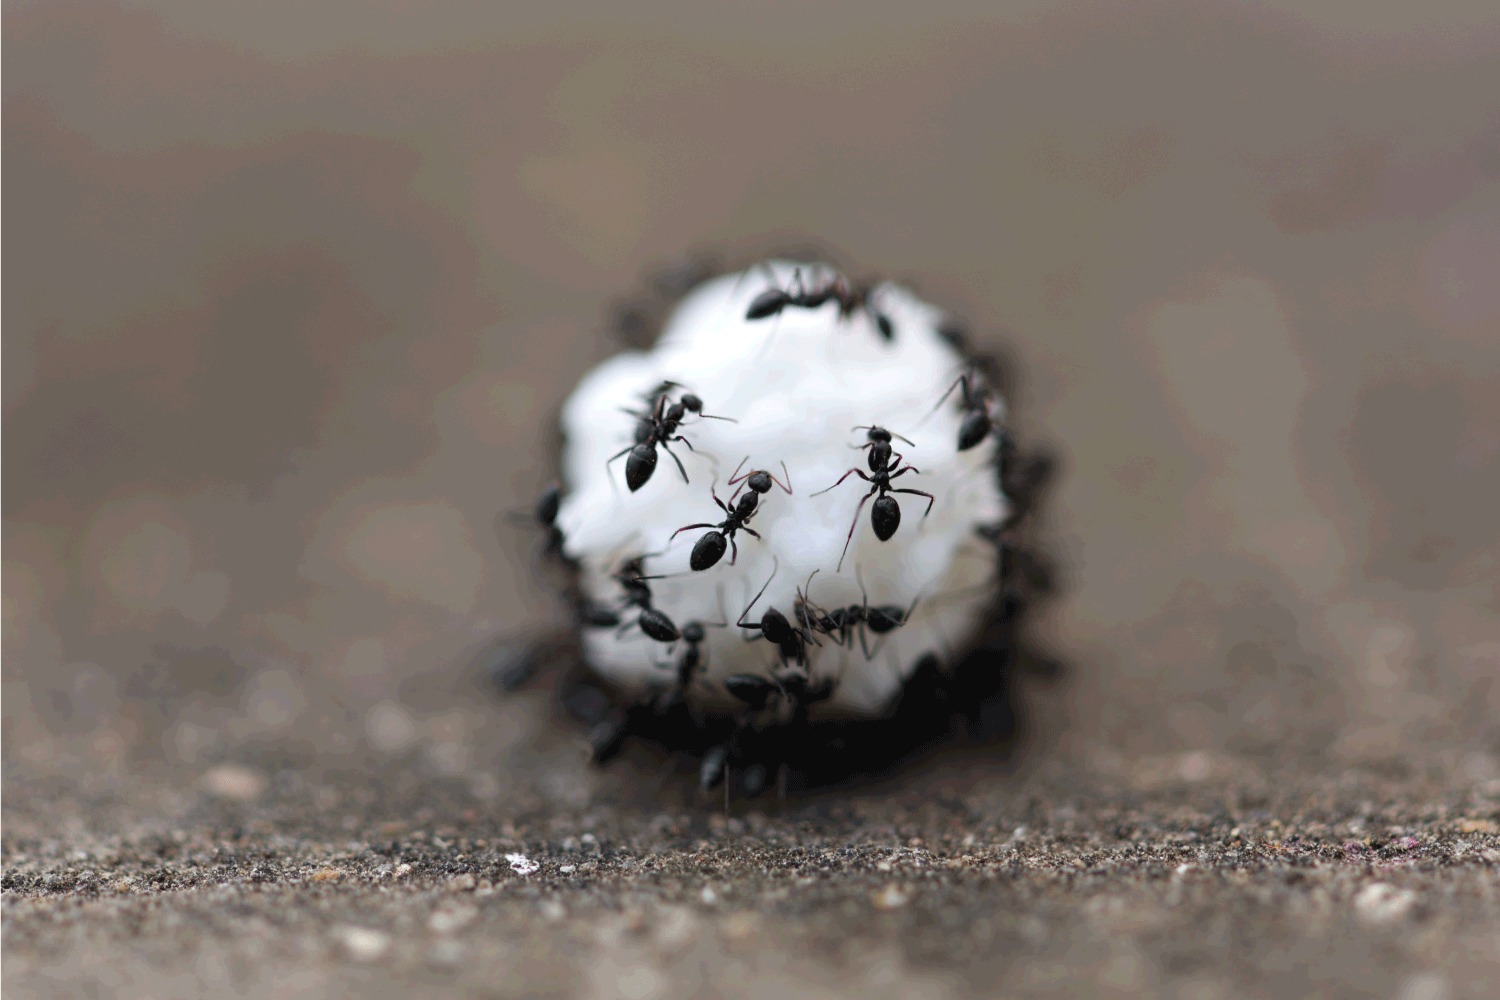 sugar cube being reduced by black ants, close up photo